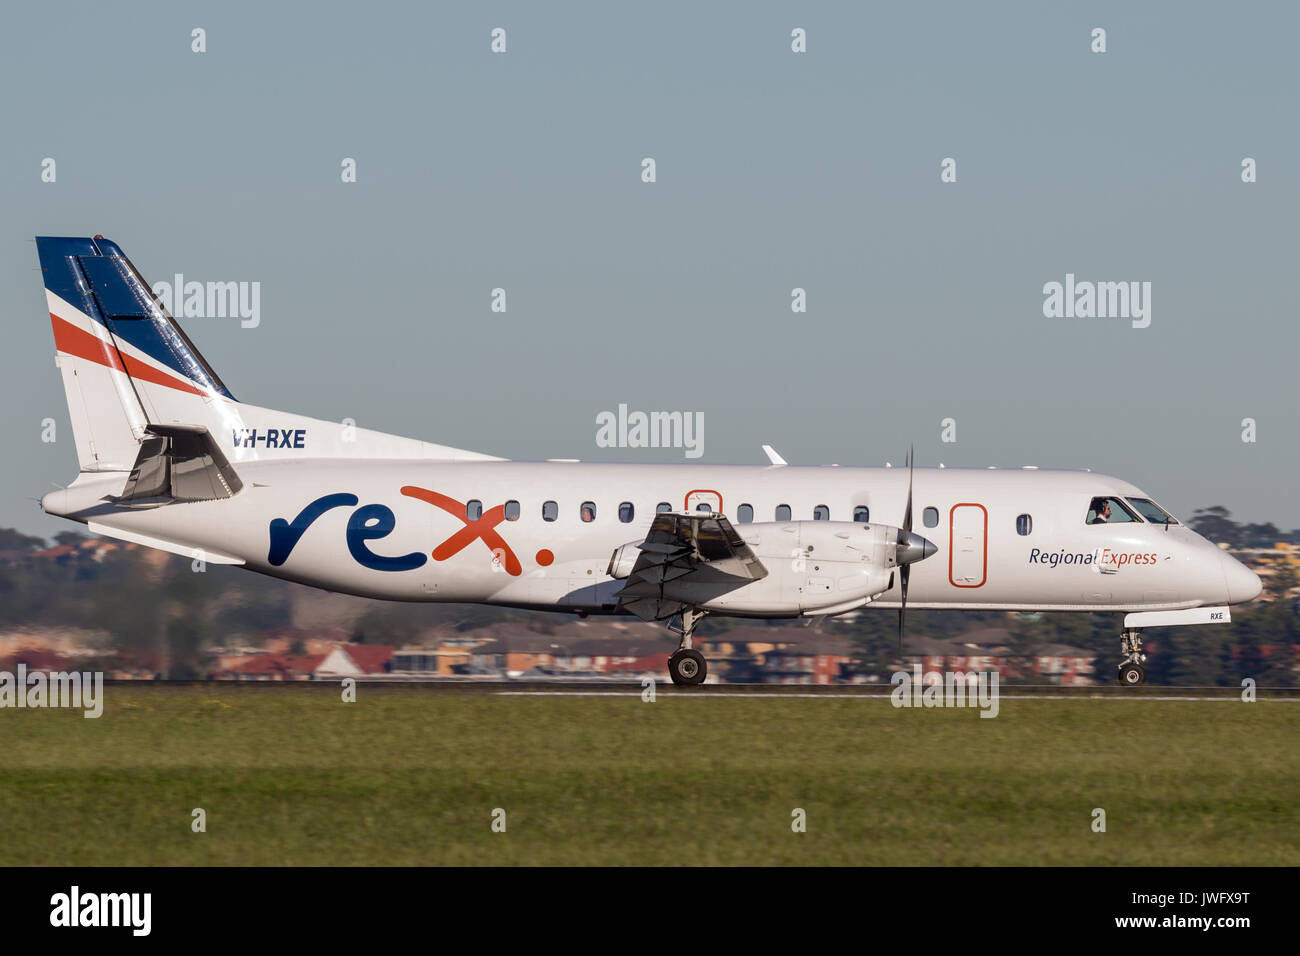 REX (Regional Express Airlines) Saab 340 twin engined regional commuter aircraft at Sydney Airport. Stock Photo